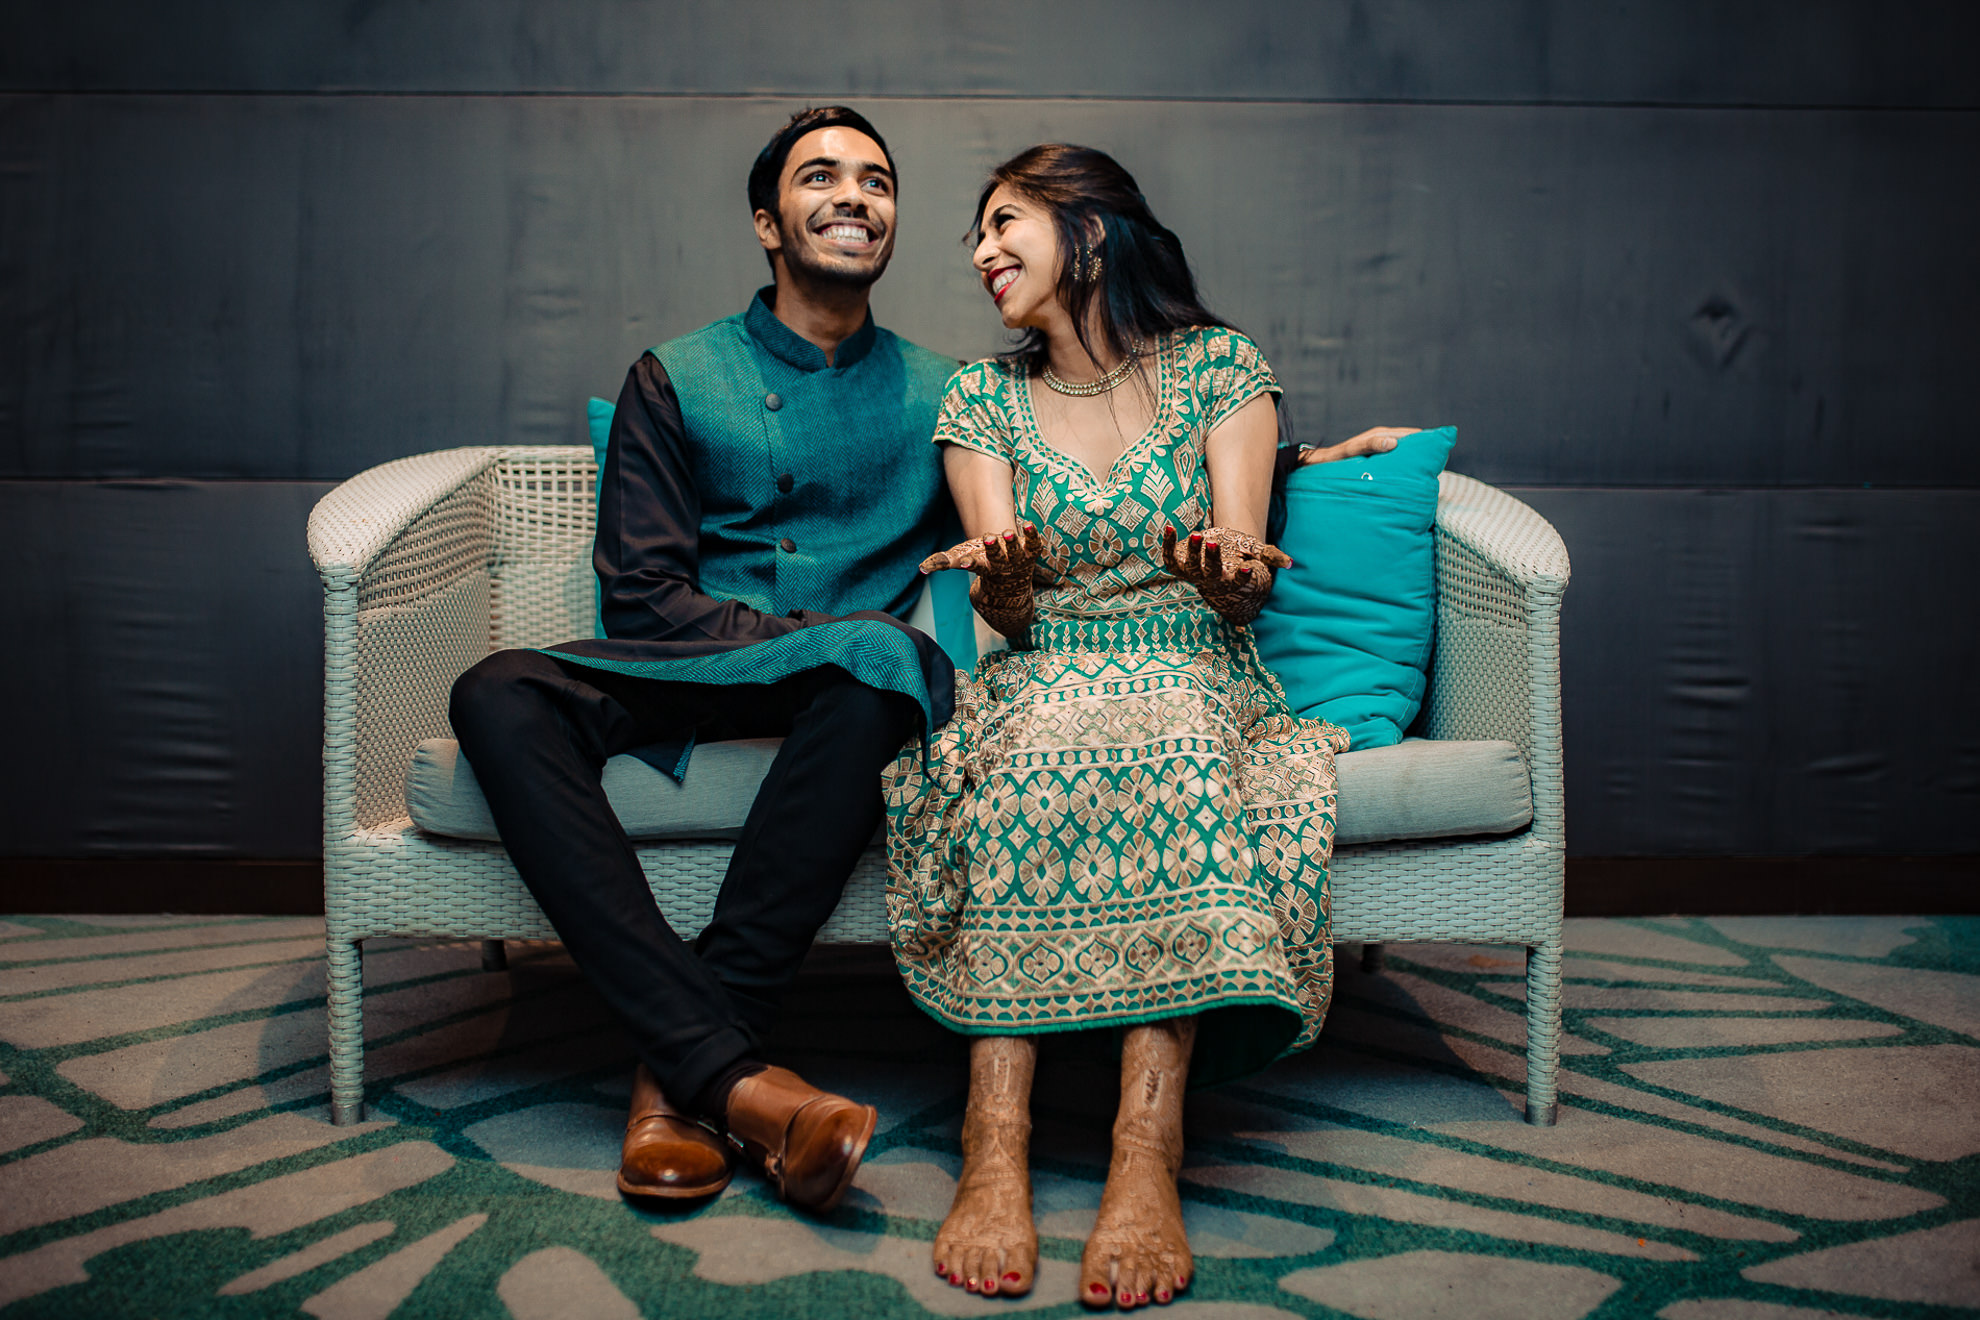 Marriage photography in Bangalore